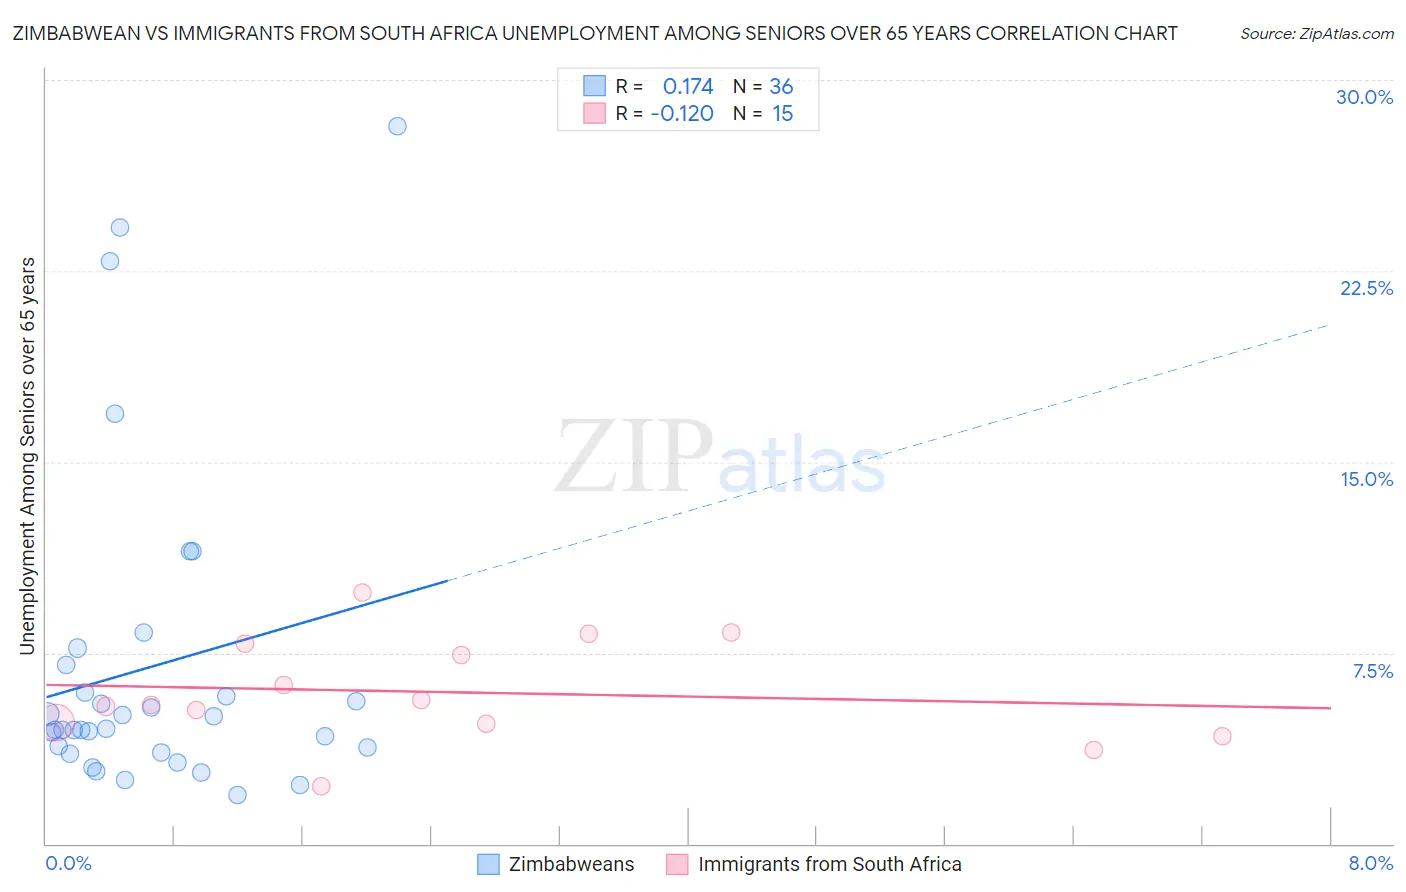 Zimbabwean vs Immigrants from South Africa Unemployment Among Seniors over 65 years